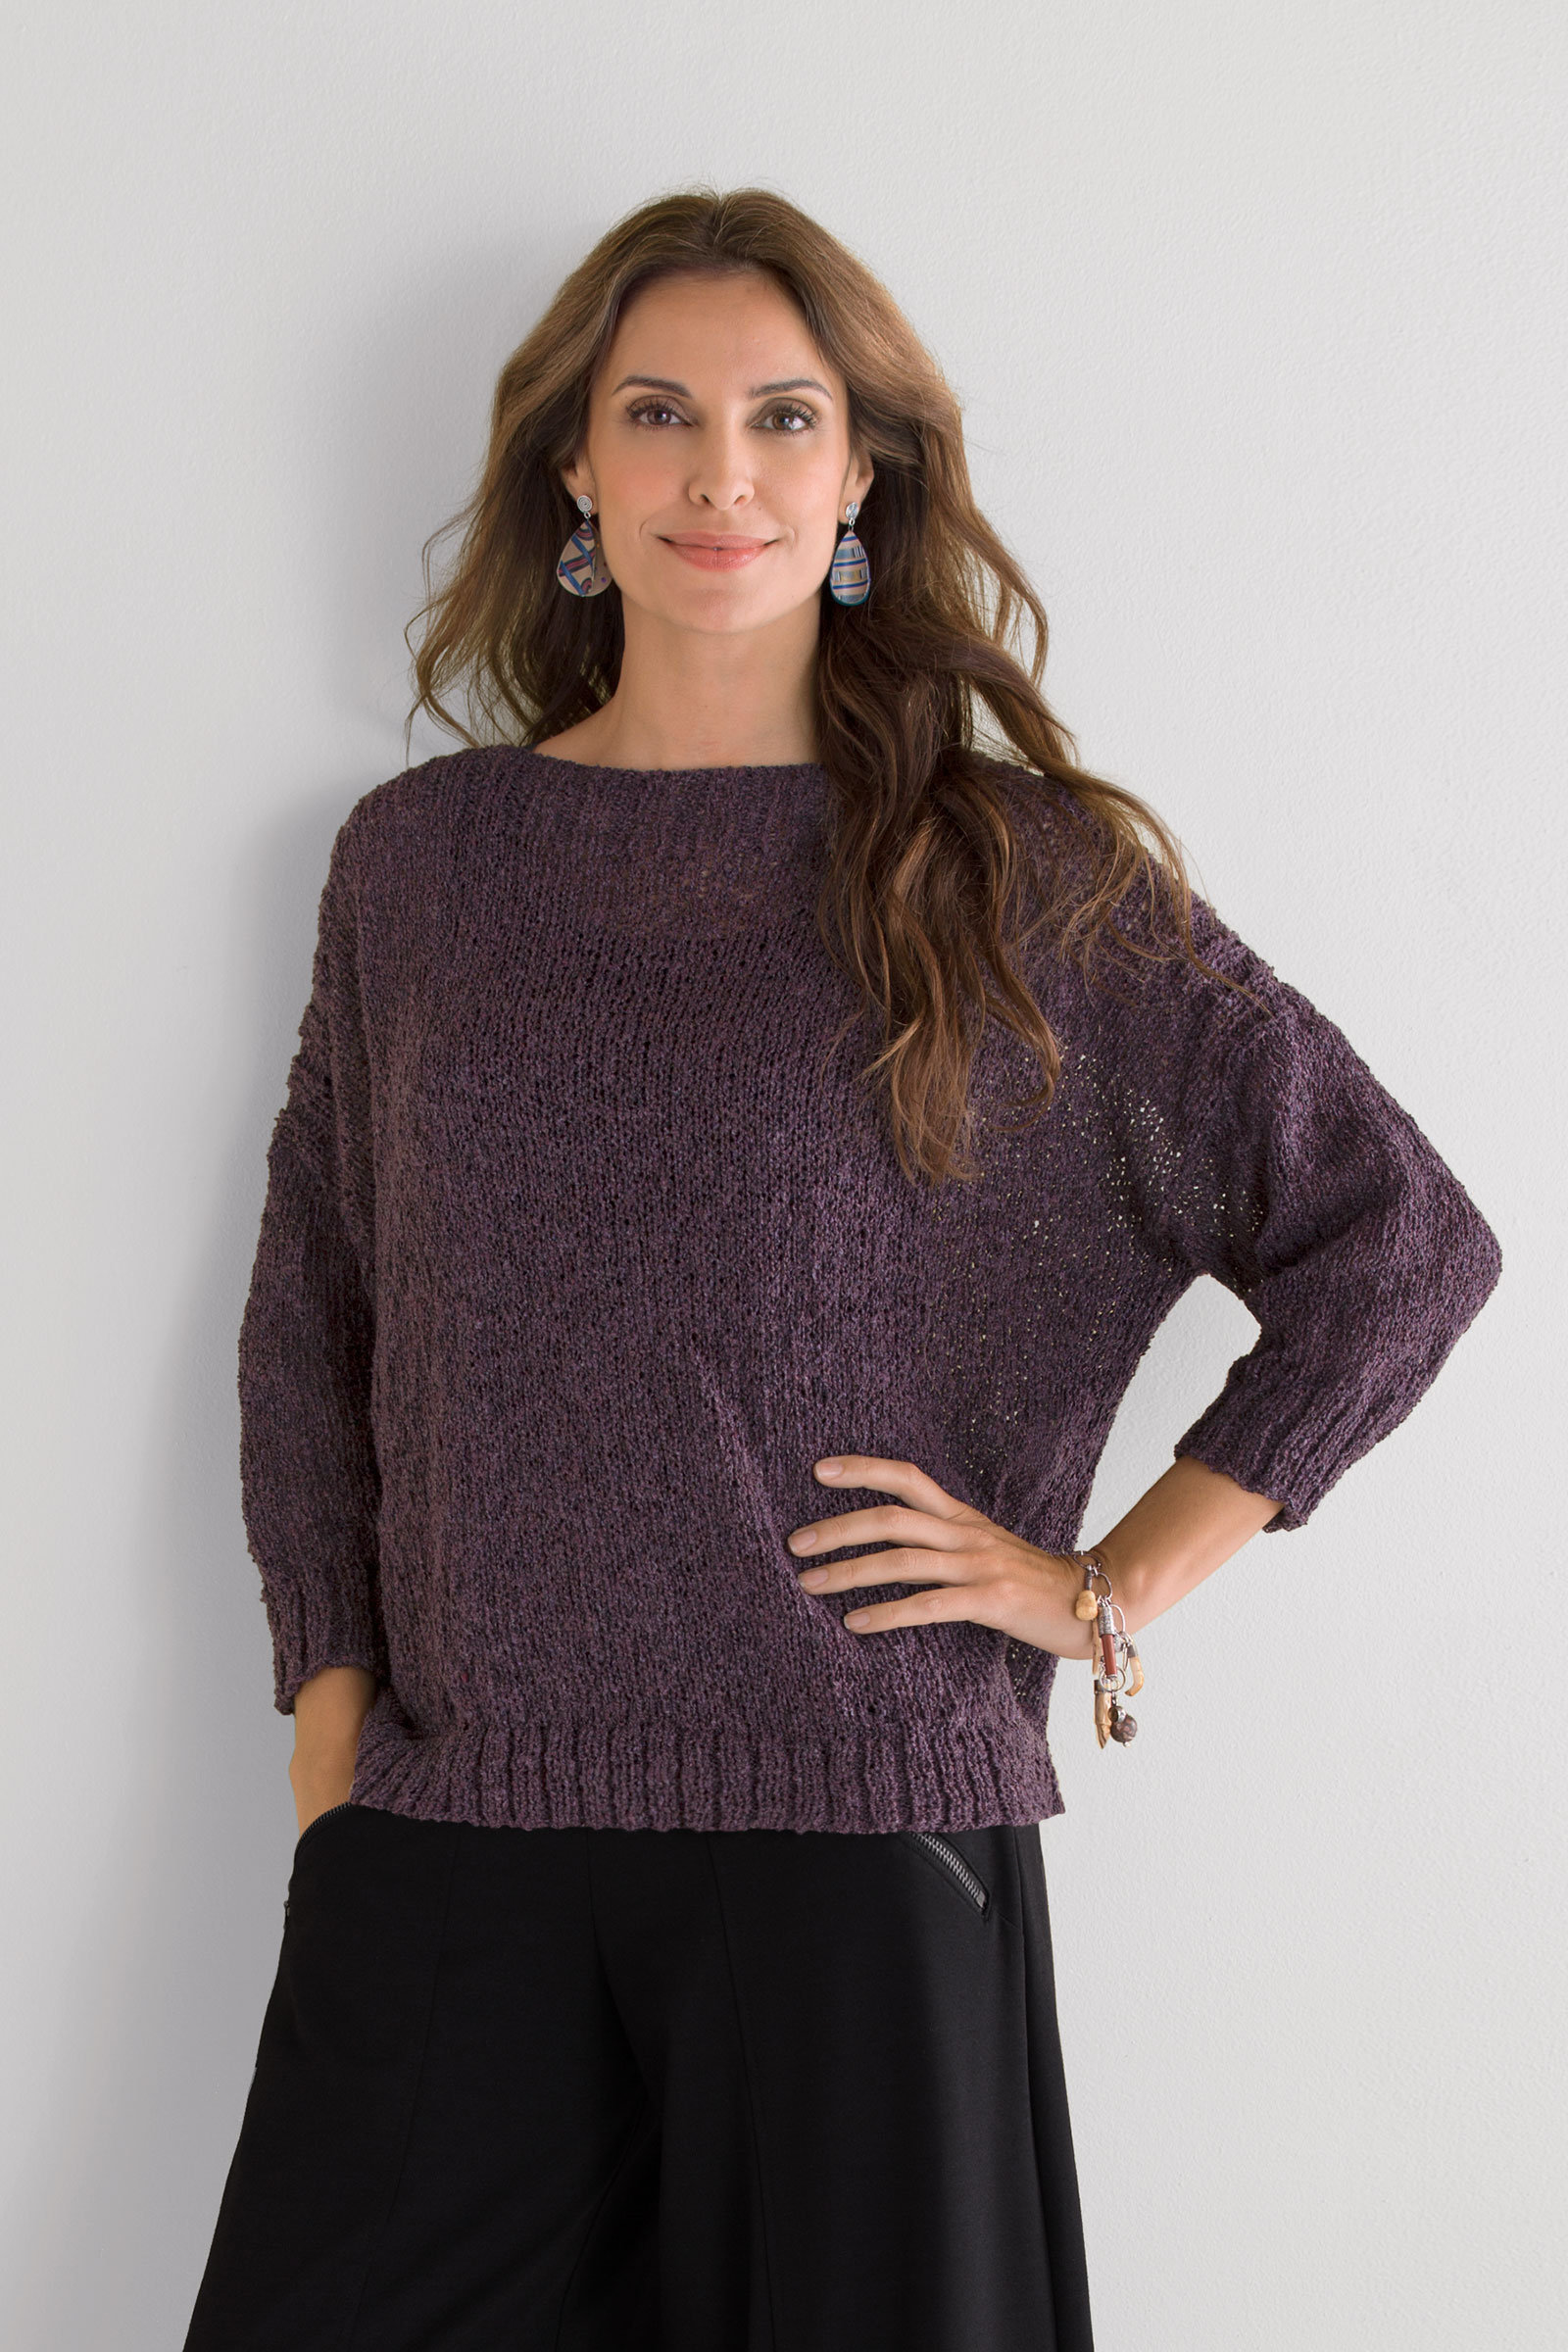 Ribtop Sweater by Amy Brill Sweaters (Knit Sweater) | Artful Home